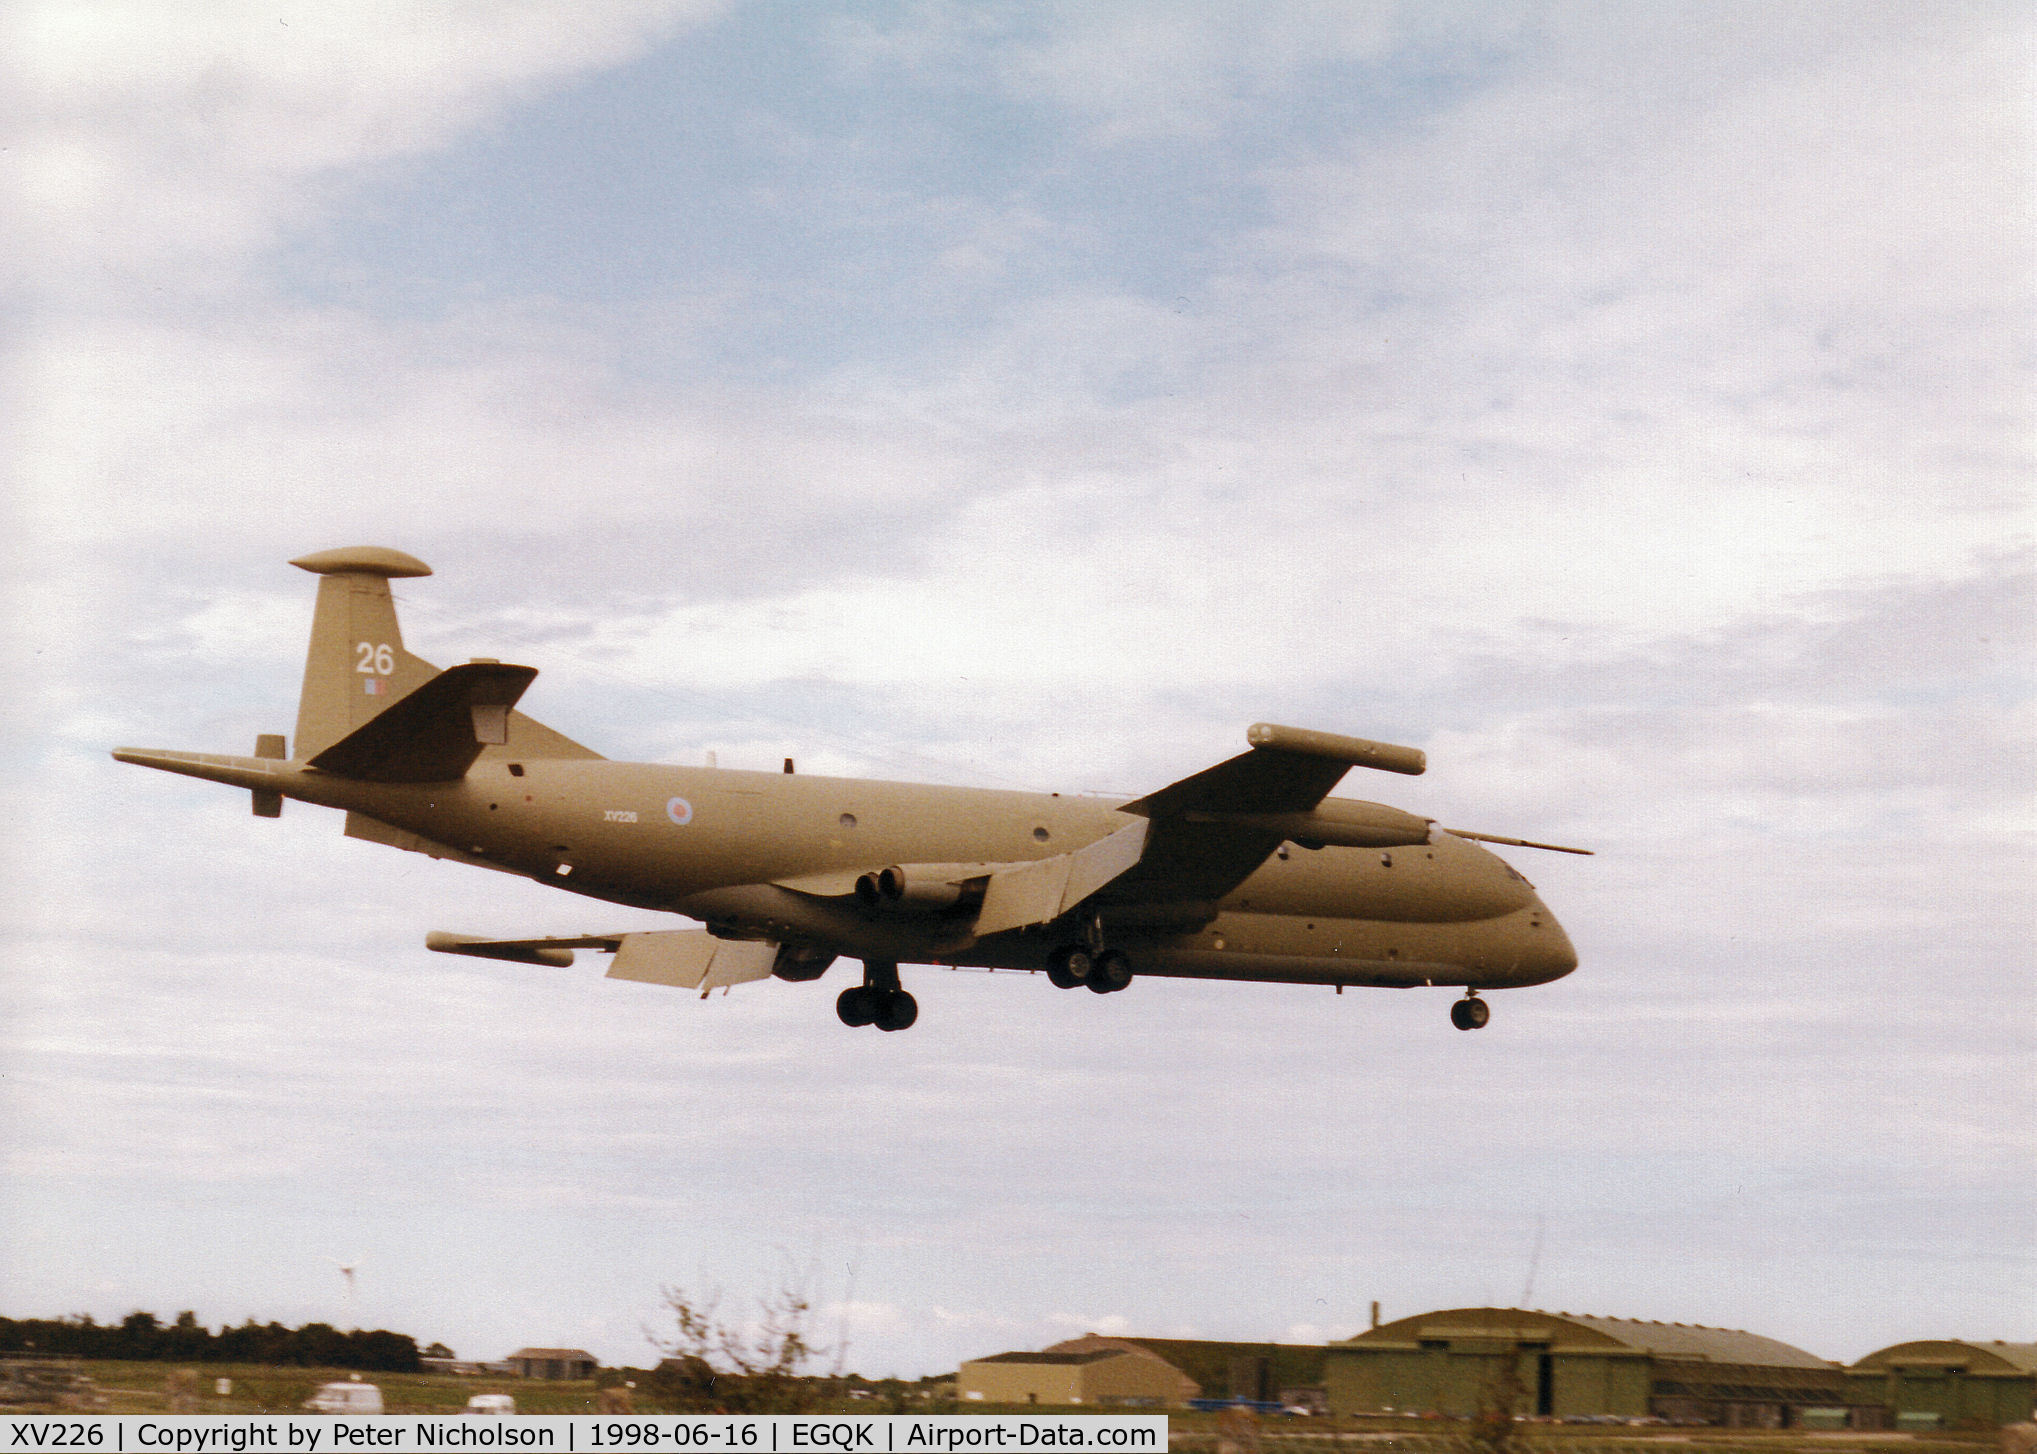 XV226, 1968 Hawker Siddeley Nimrod MR.2 C/N 8001, Nimrod MR.2 of the Kinloss Maritime Reconnaissance Wing landing on Runway 08 at RAF Kinloss in the Summer of 1998.